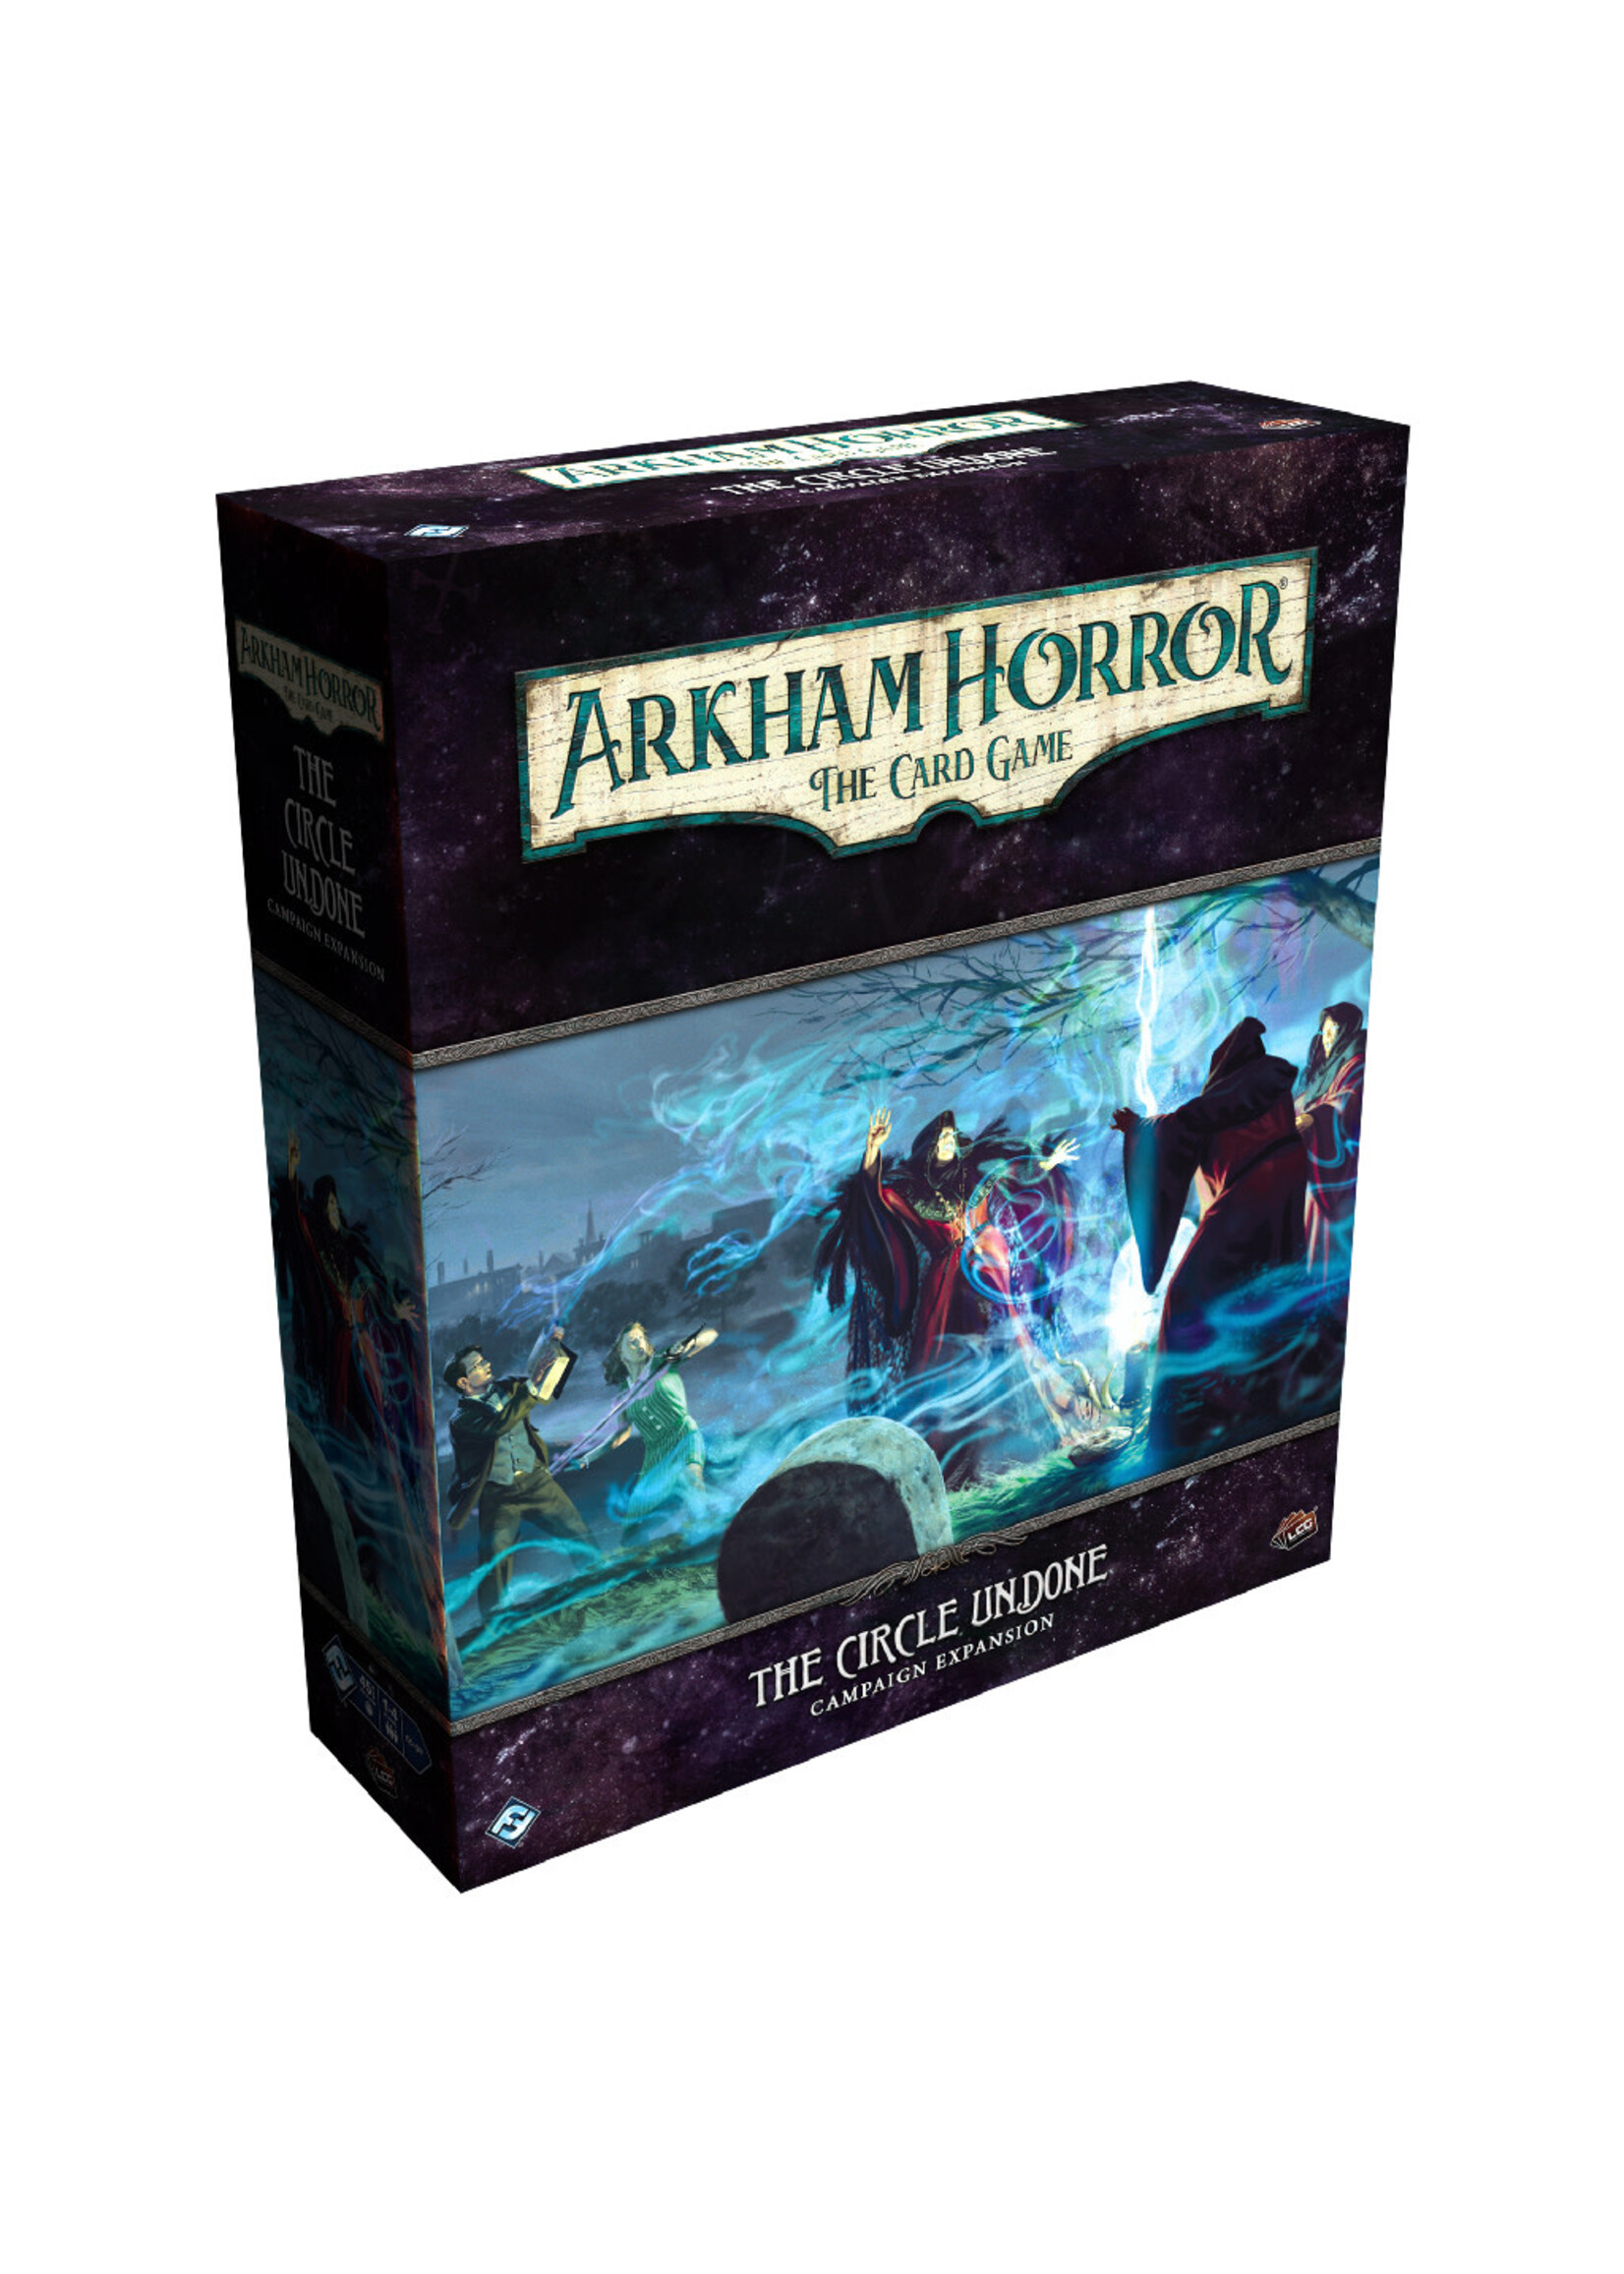 Fantasy Flight Games Arkham Horror: The Card Game - The Circle Undone Campaign Expansion